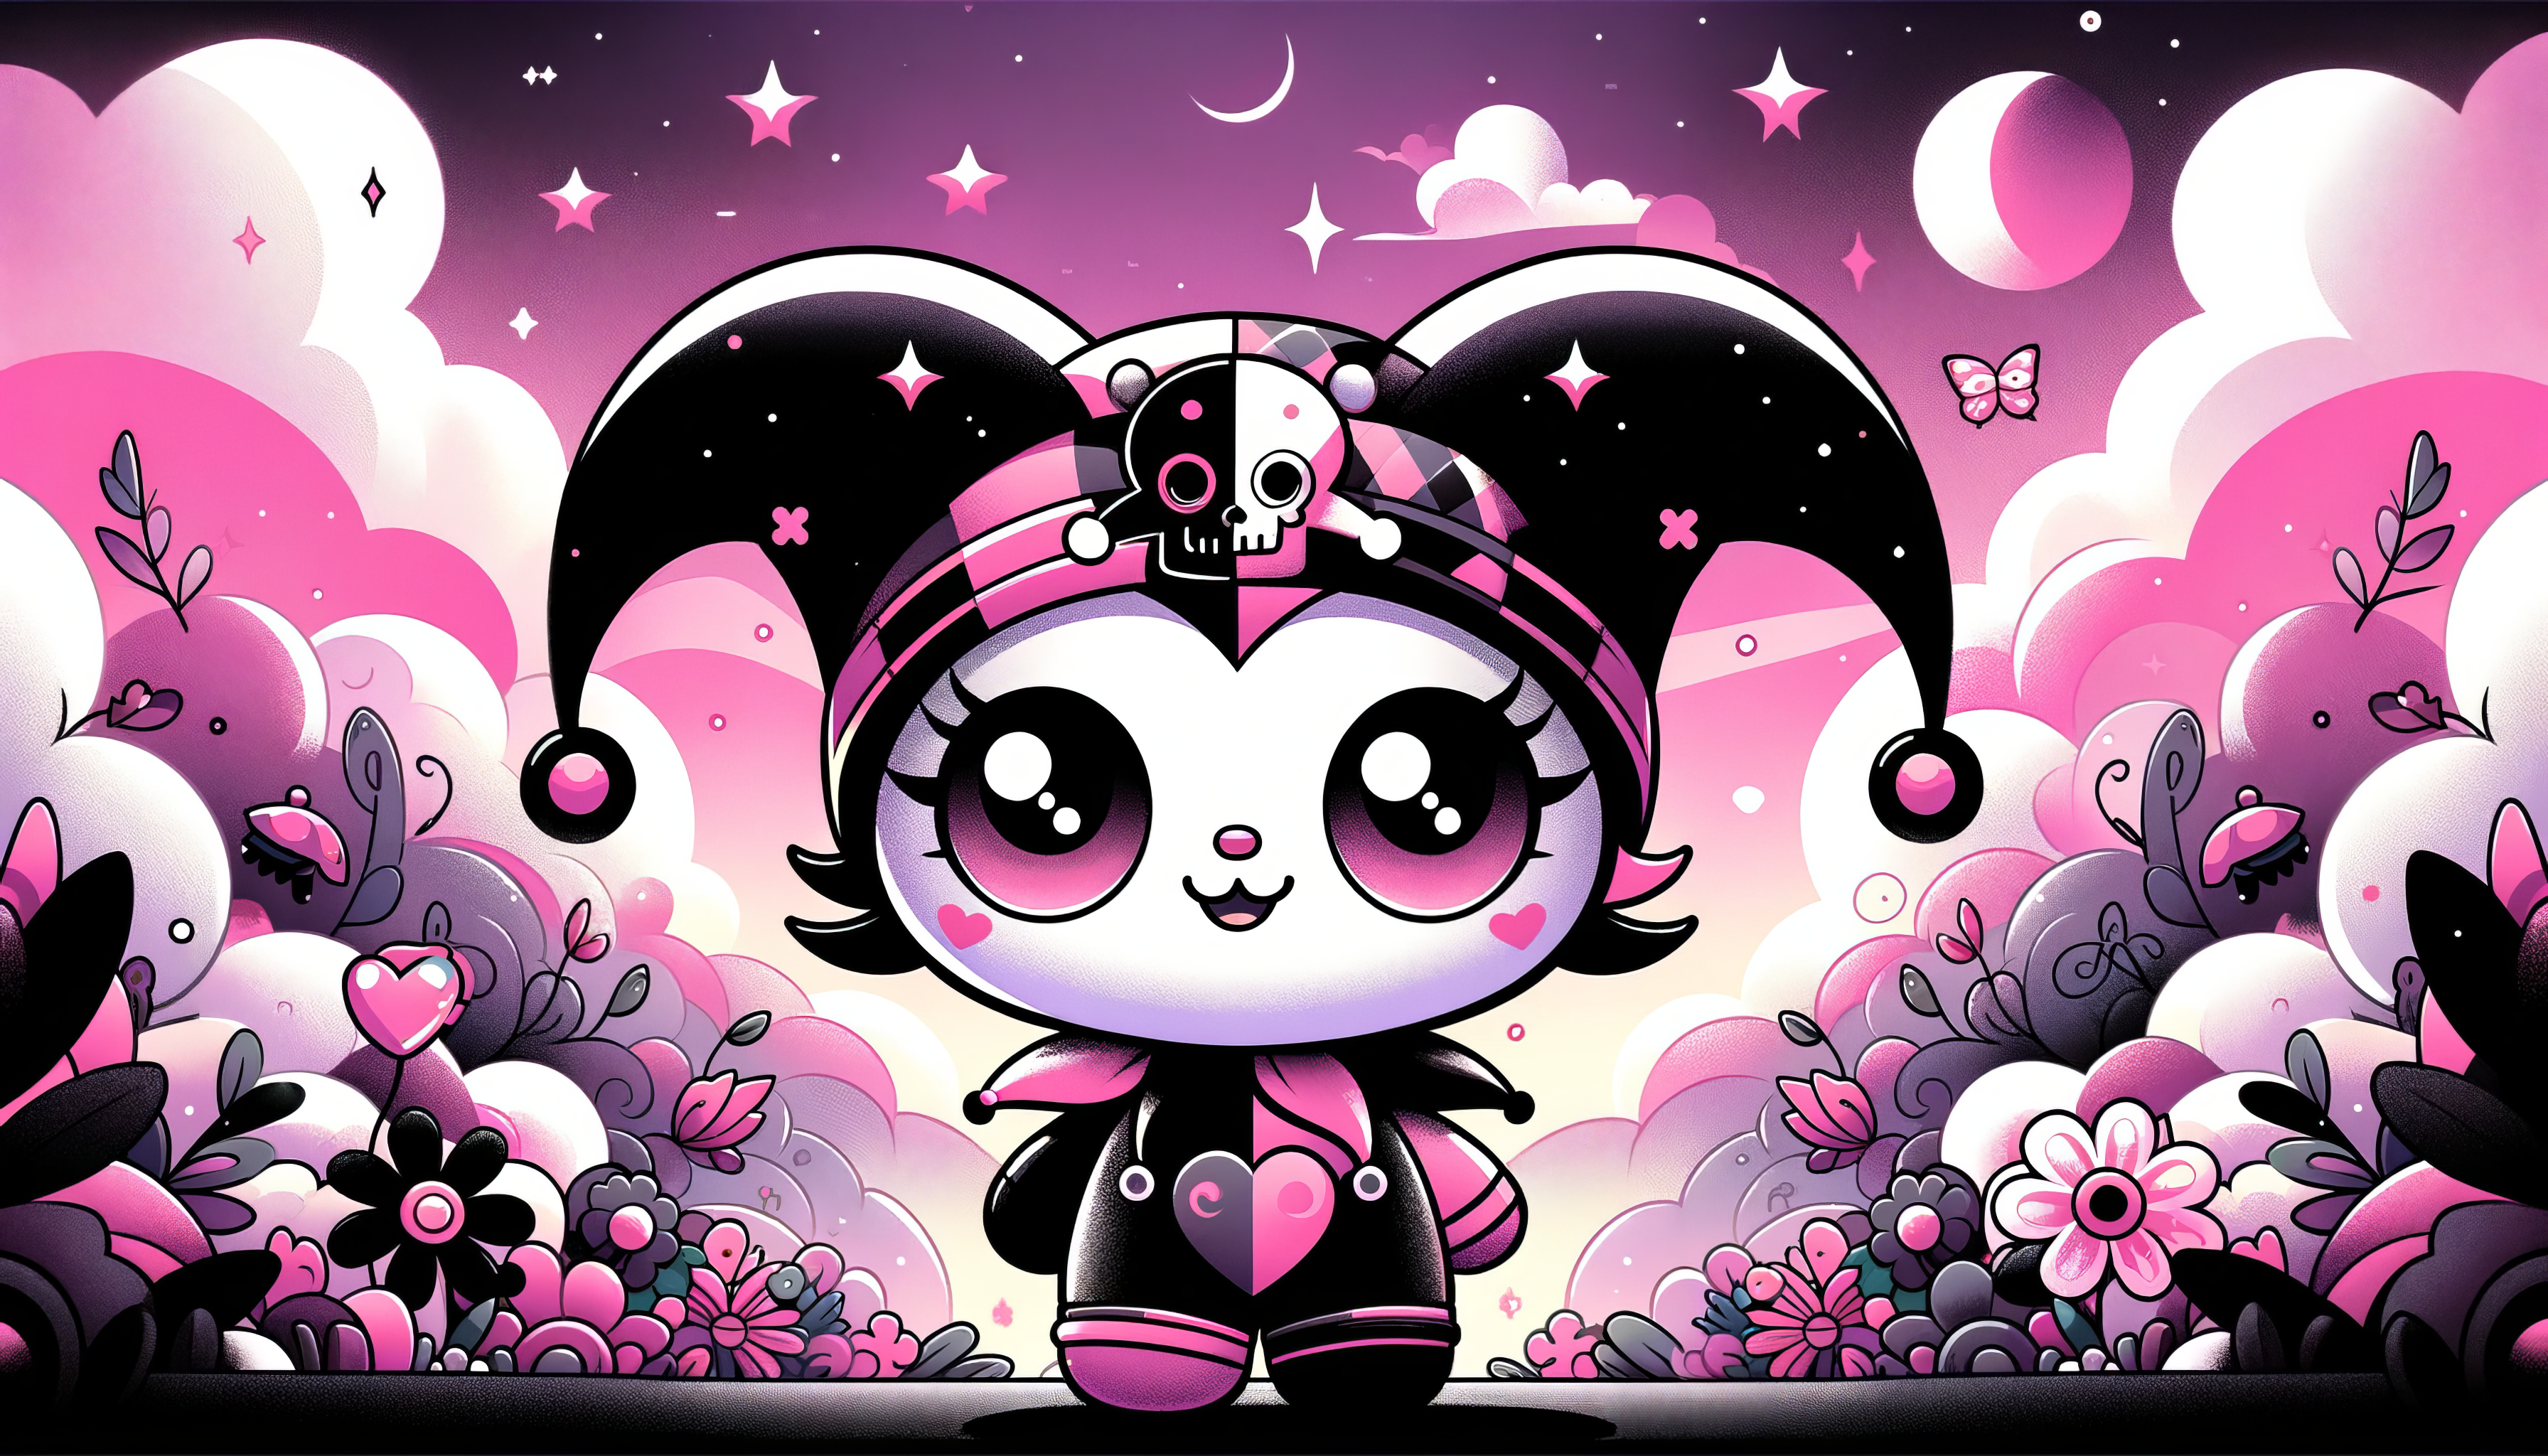 Alt-text: HD wallpaper featuring Kuromi from Hello Kitty, set against a whimsical pink and purple background with stars and flowers, perfect for desktop and background use.